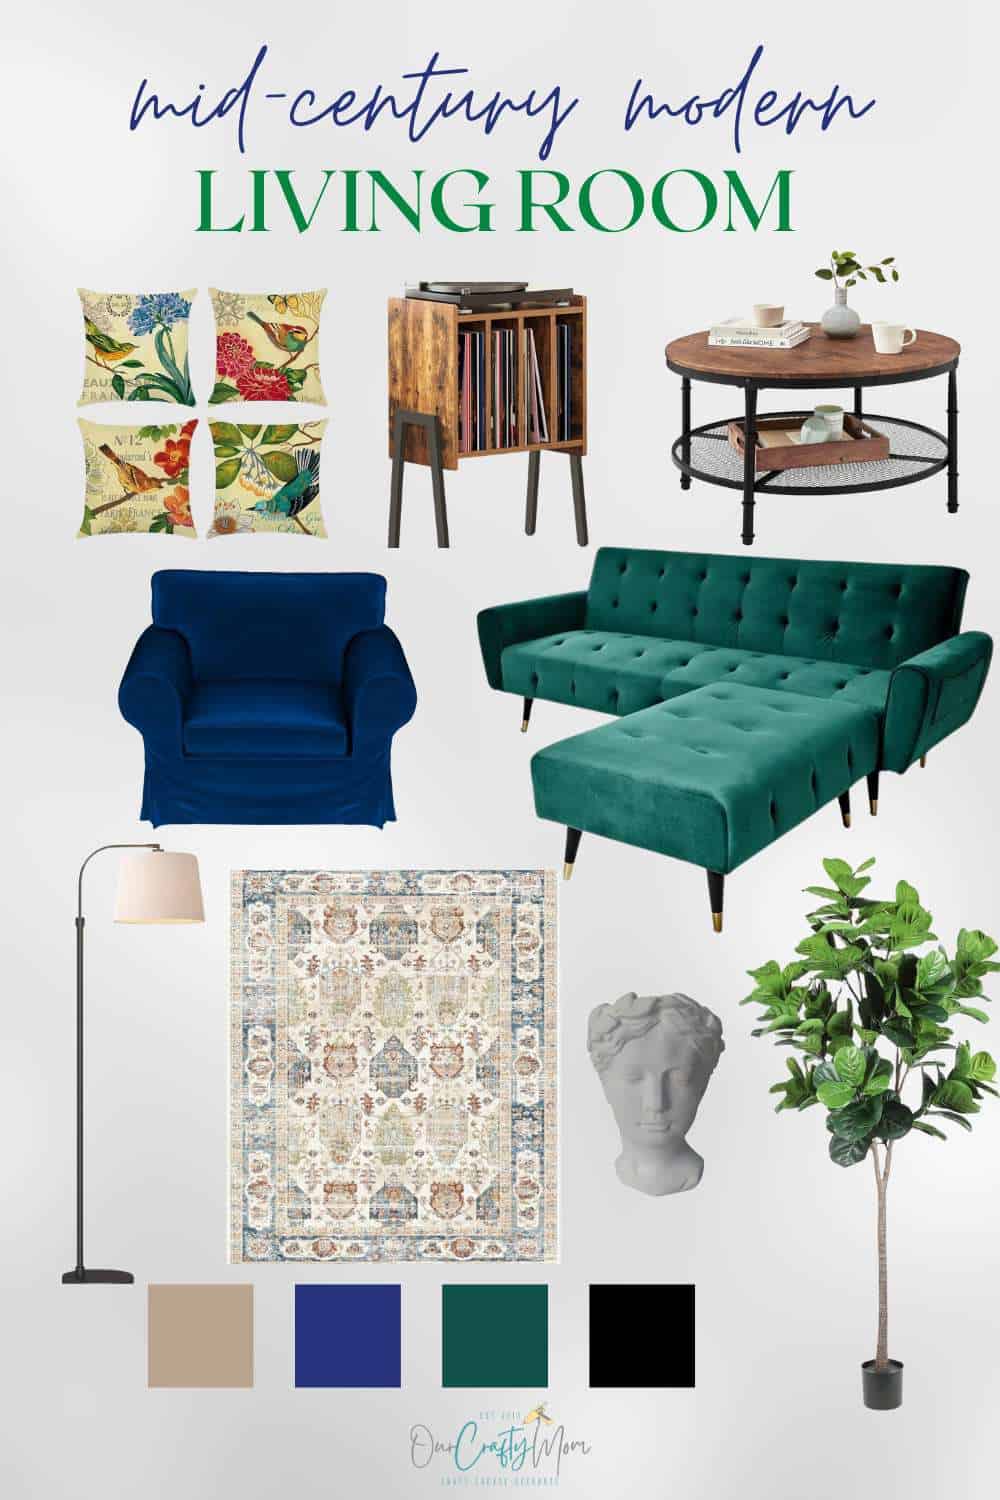 mood board with cozy living room decor.